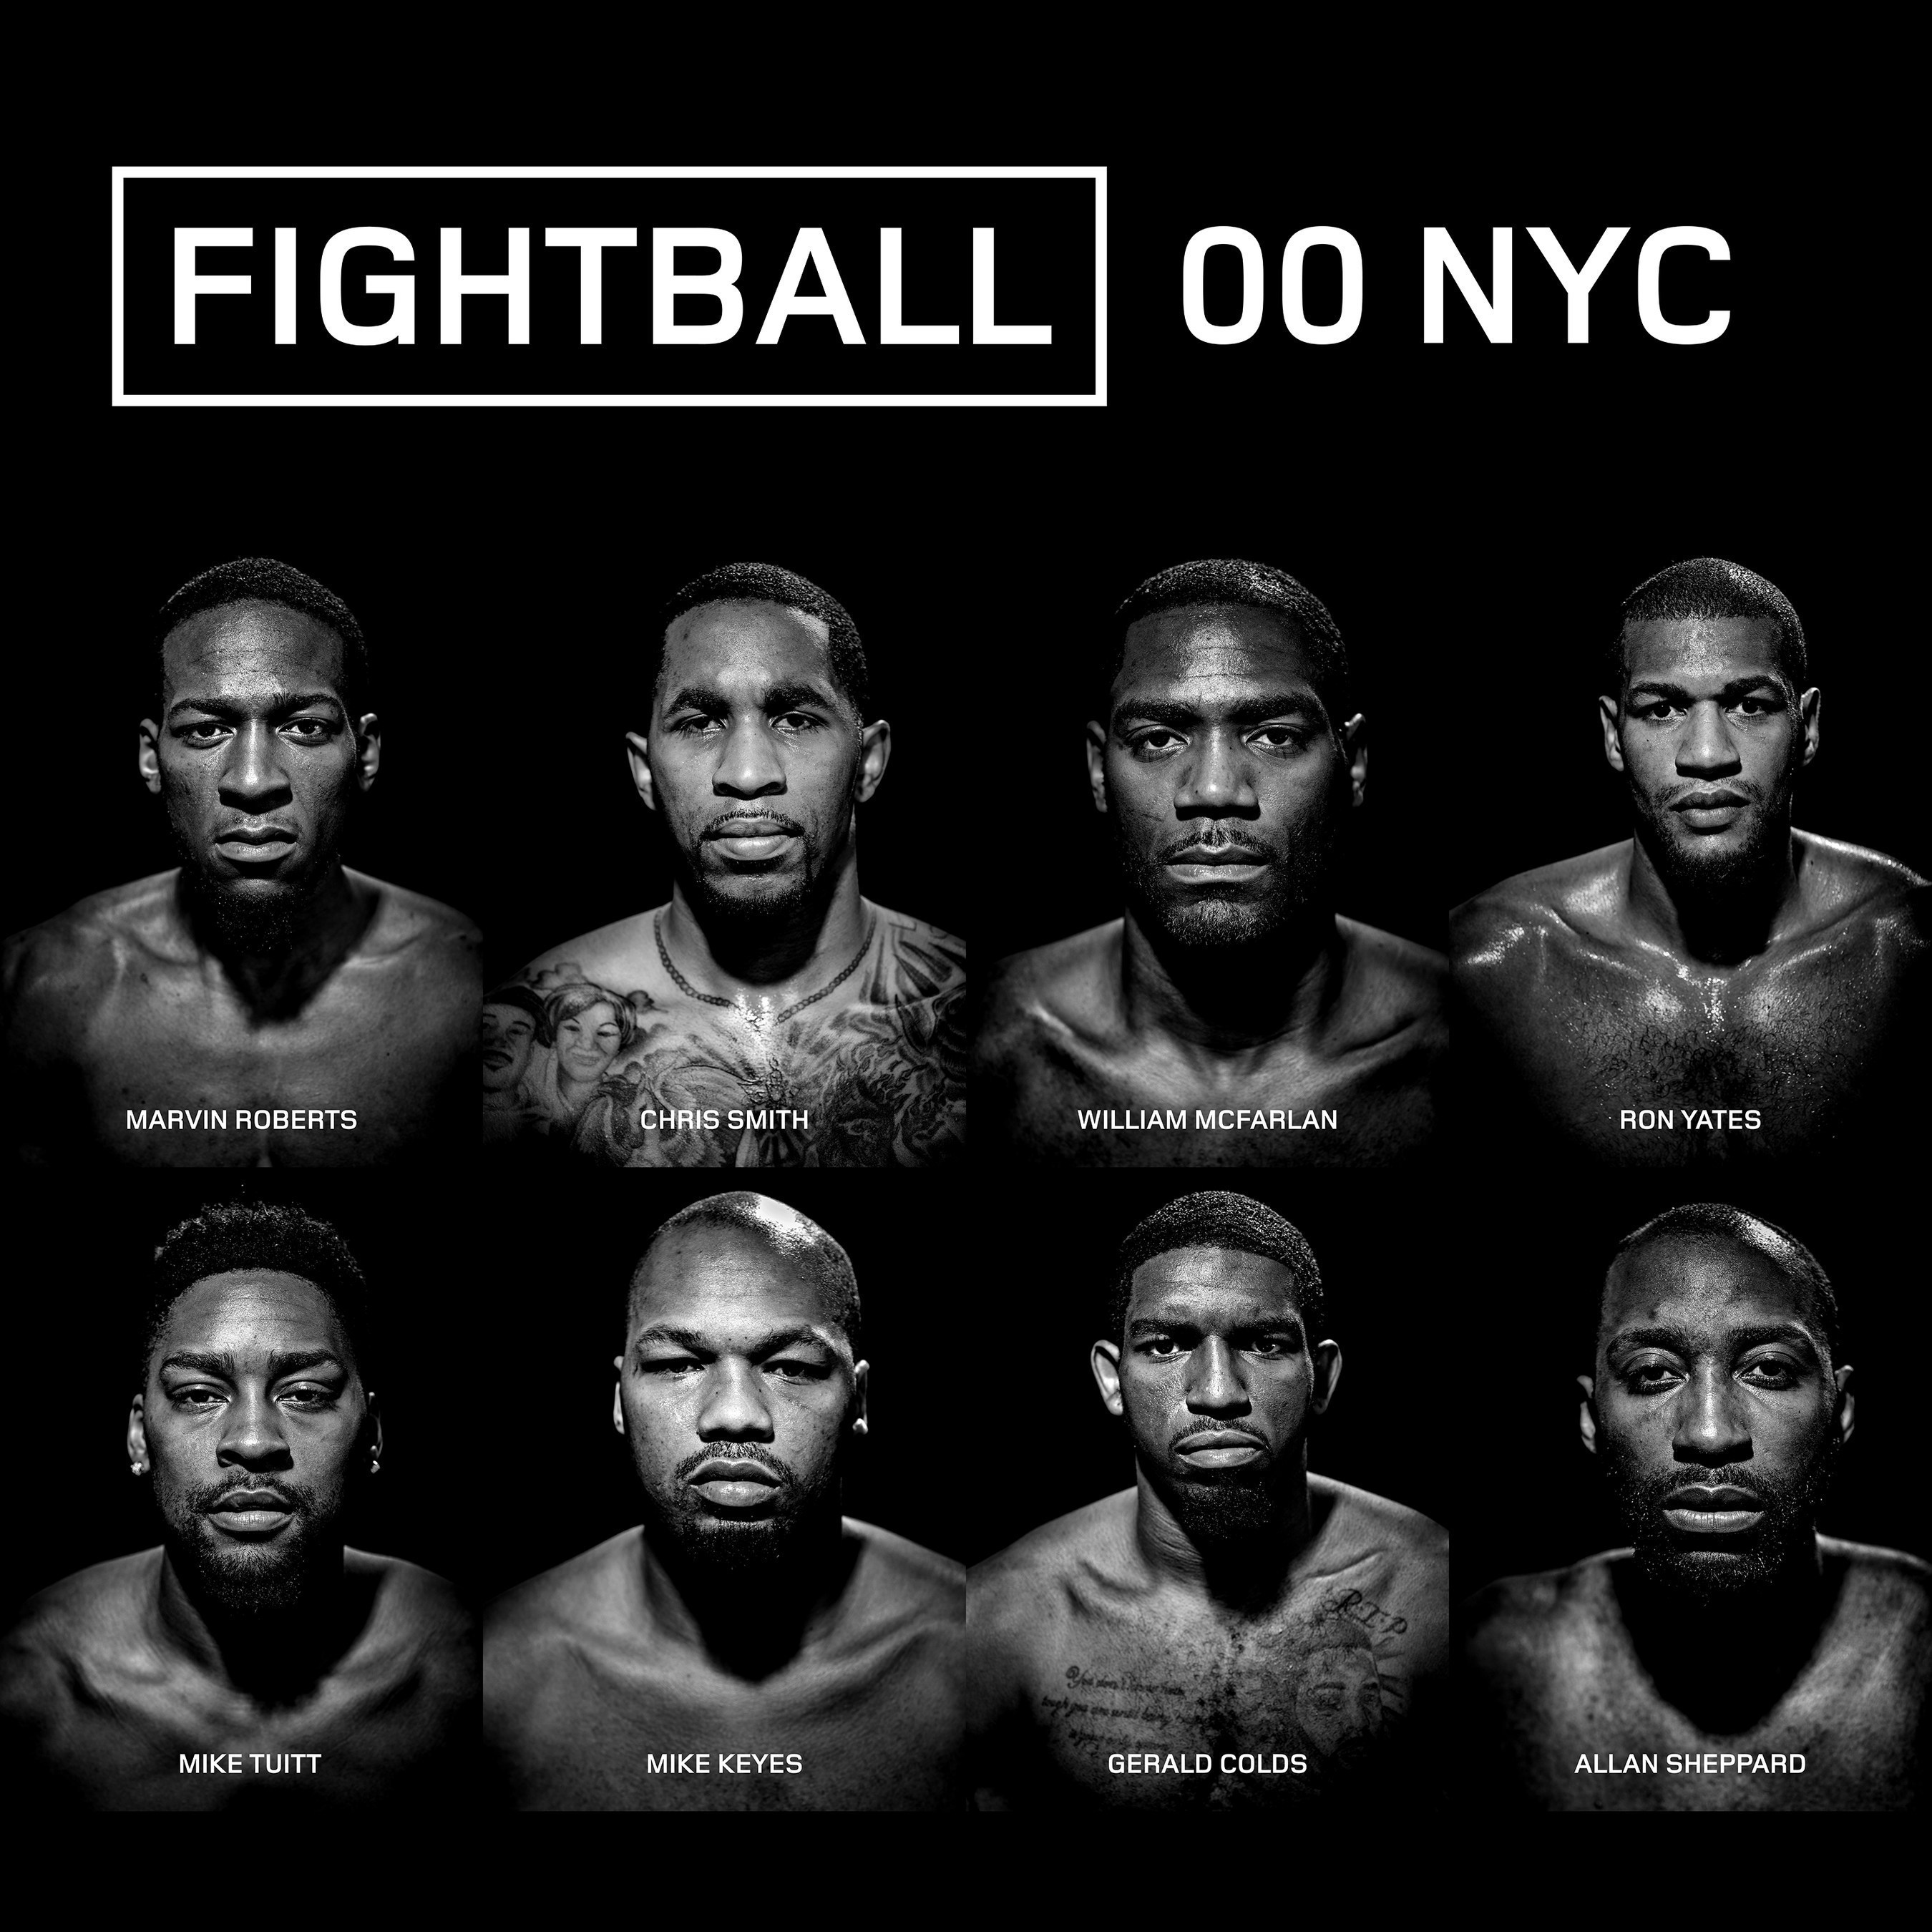 New One-on-One Basketball Property Fightball Launches in NYC